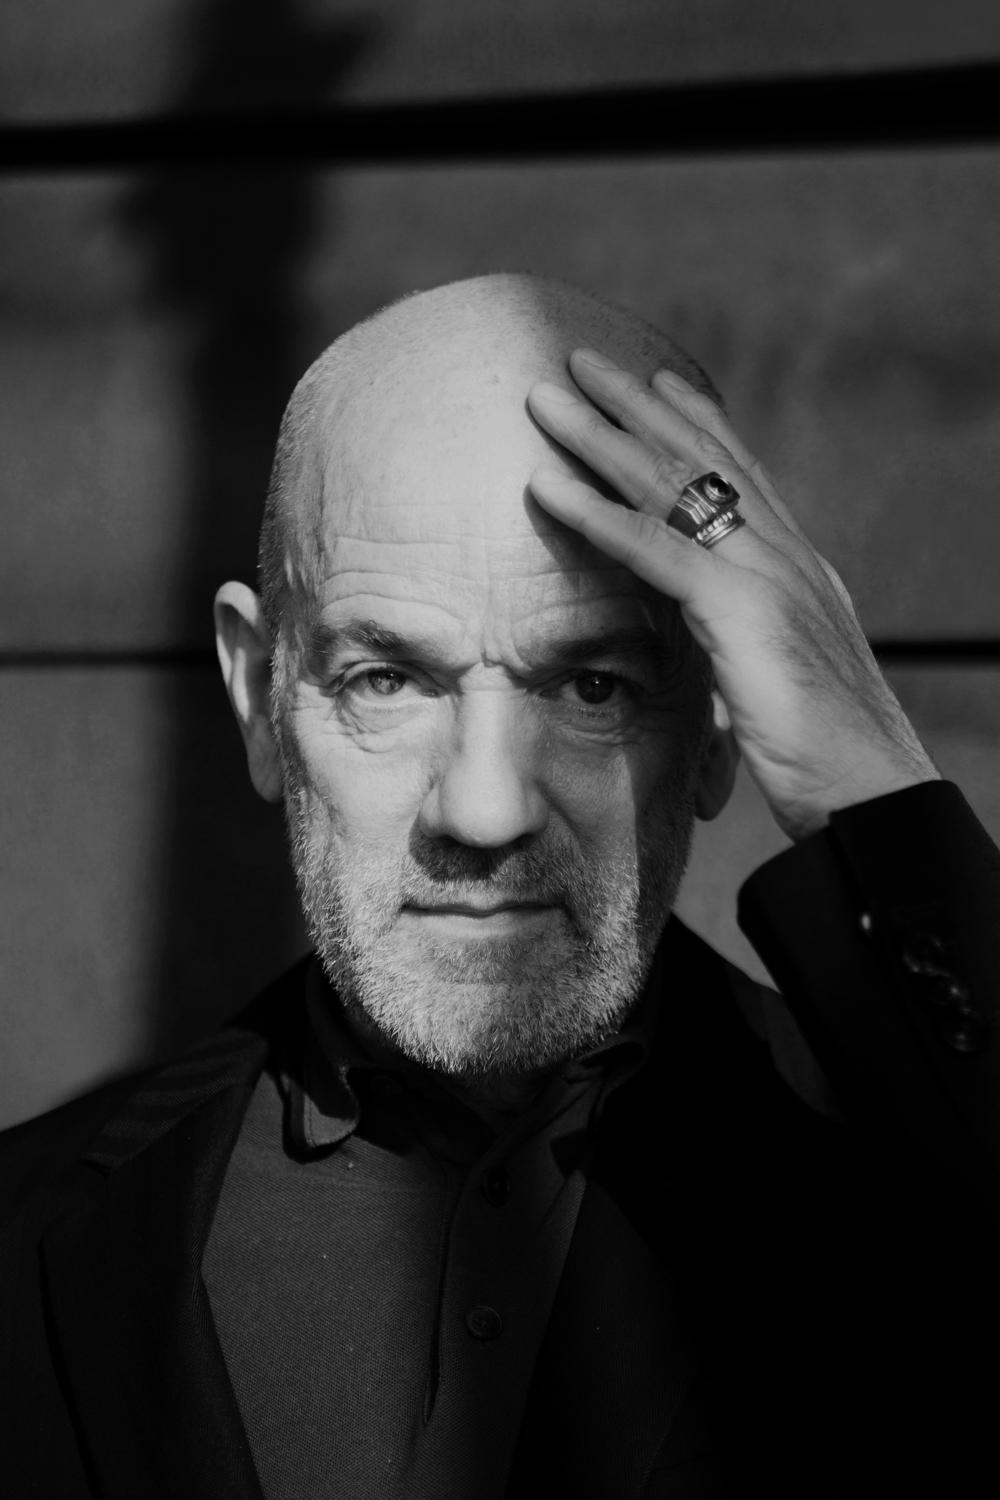 Musicians - Michael Stipe of R.E.M. for the New Yorker